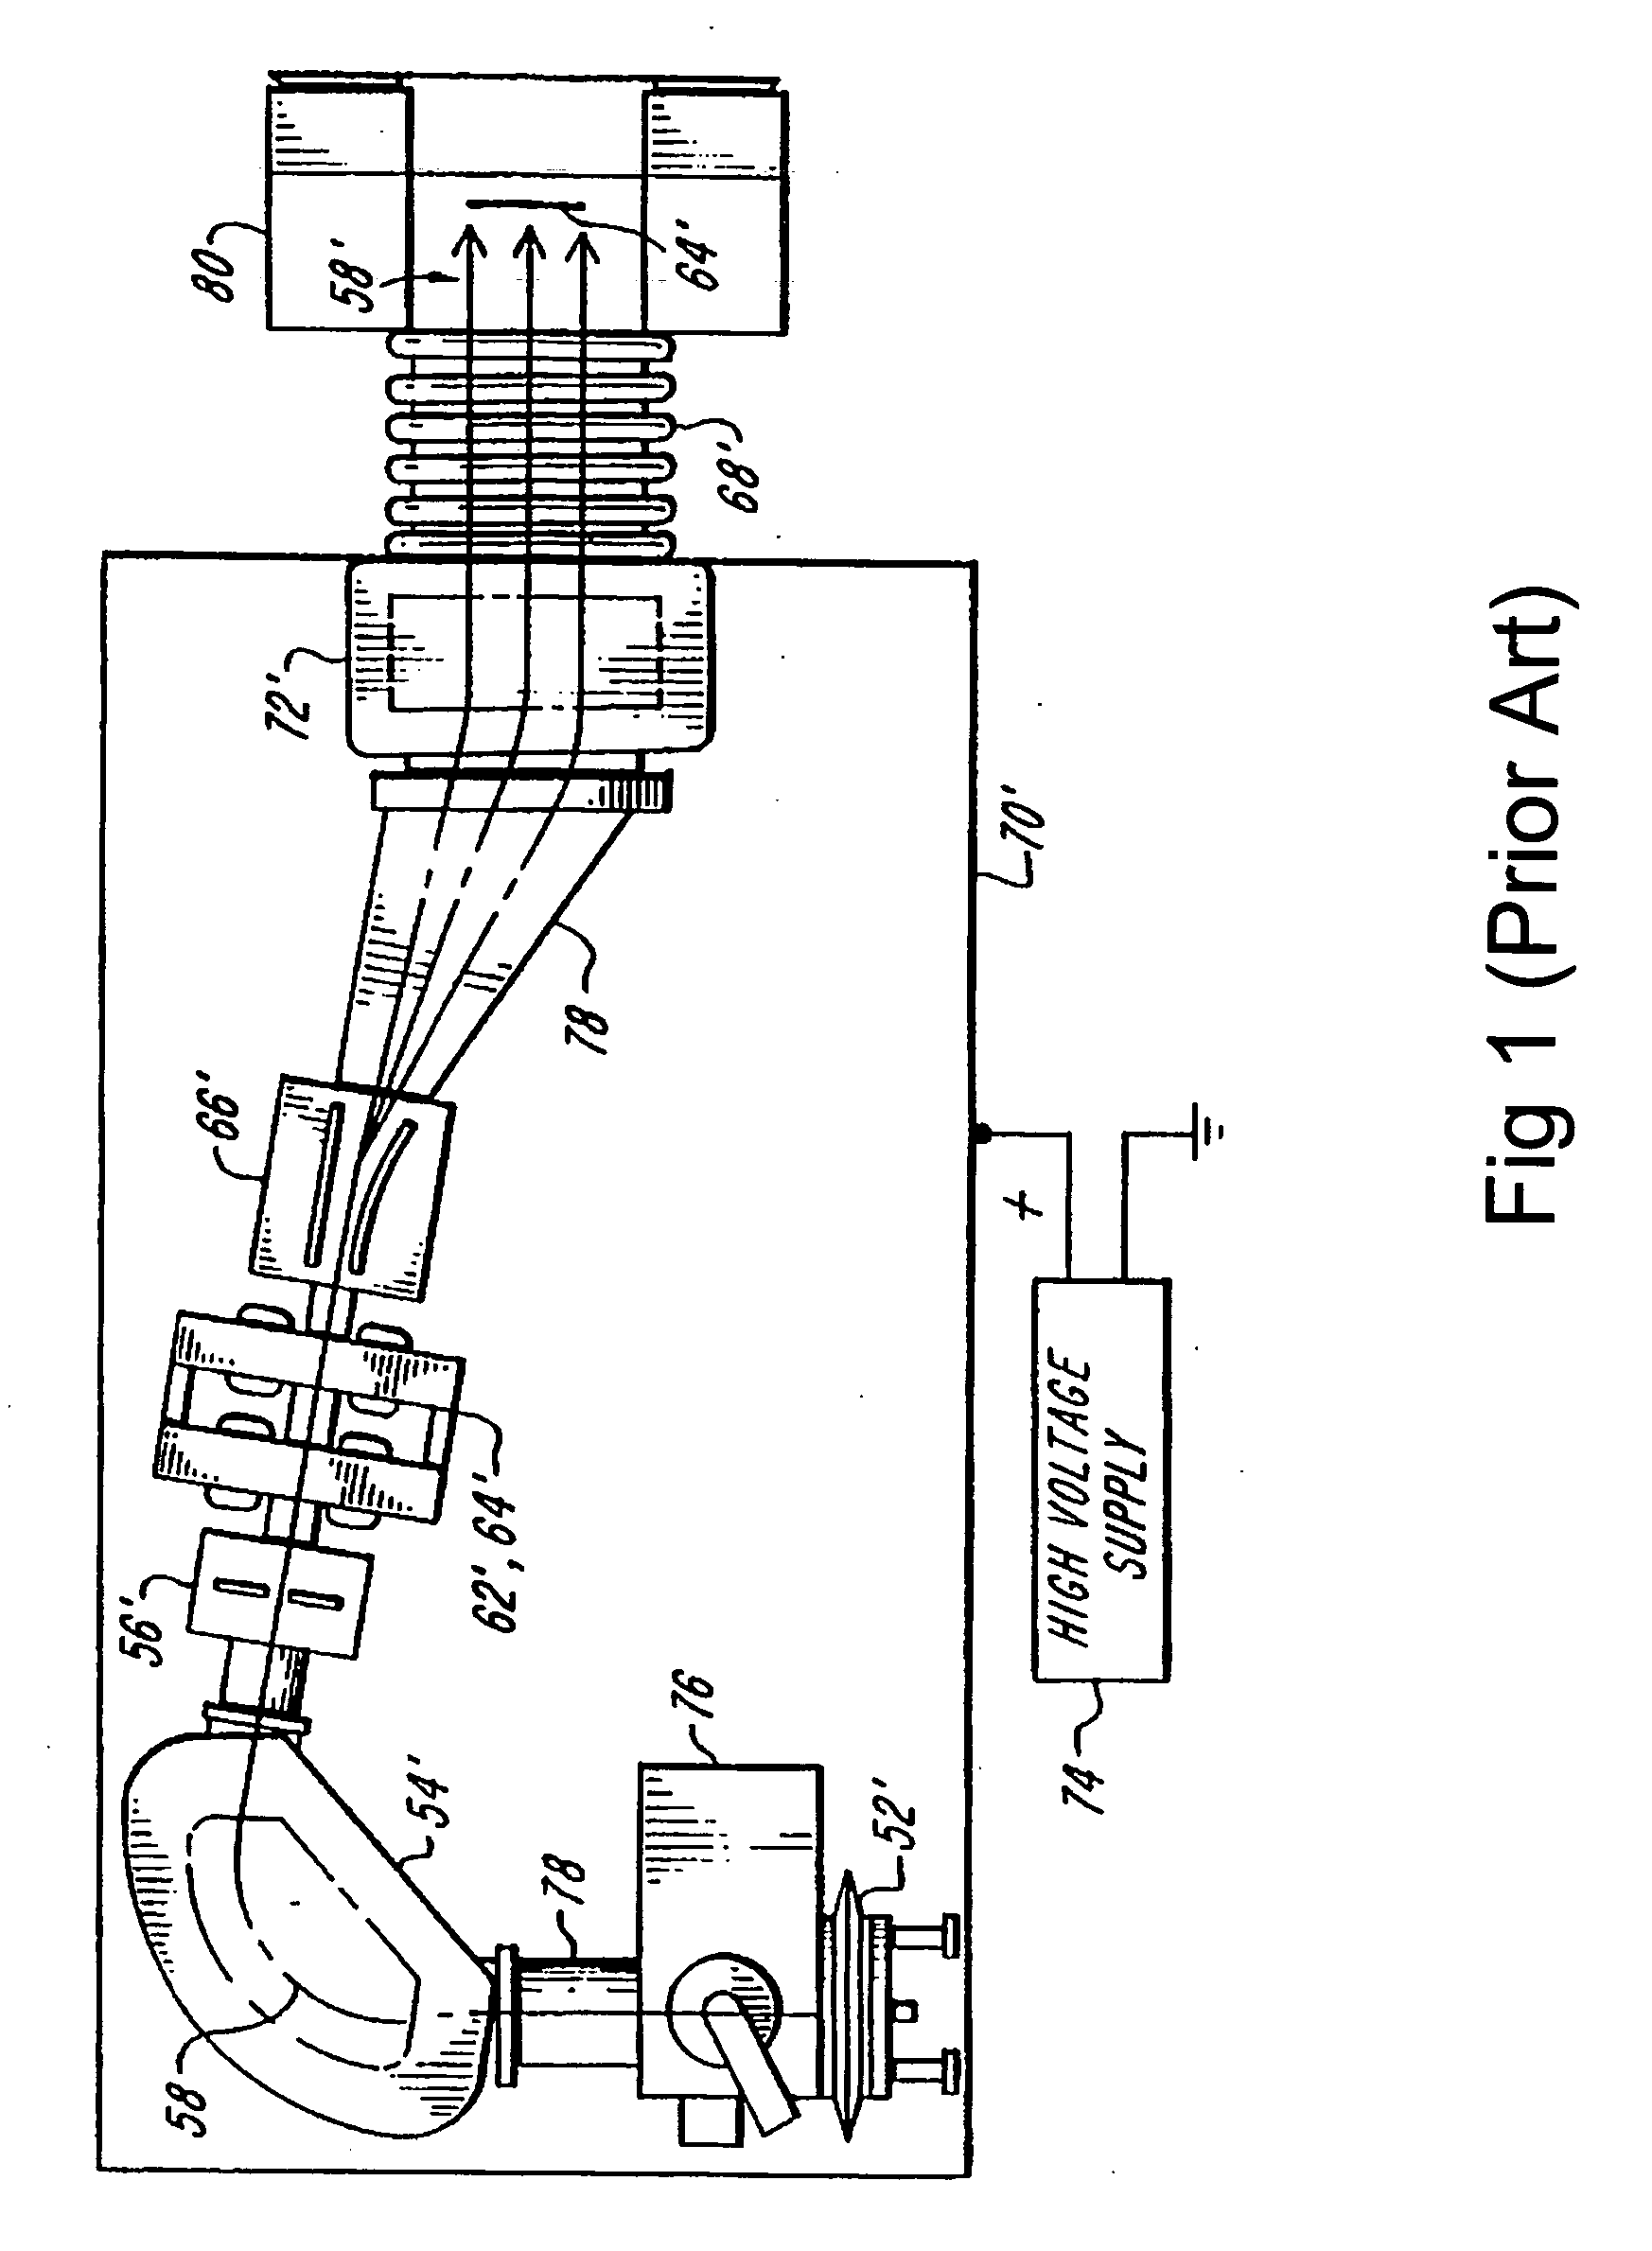 Radial scan arm and collimator for serial processing of semiconductor wafers with ribbon beams